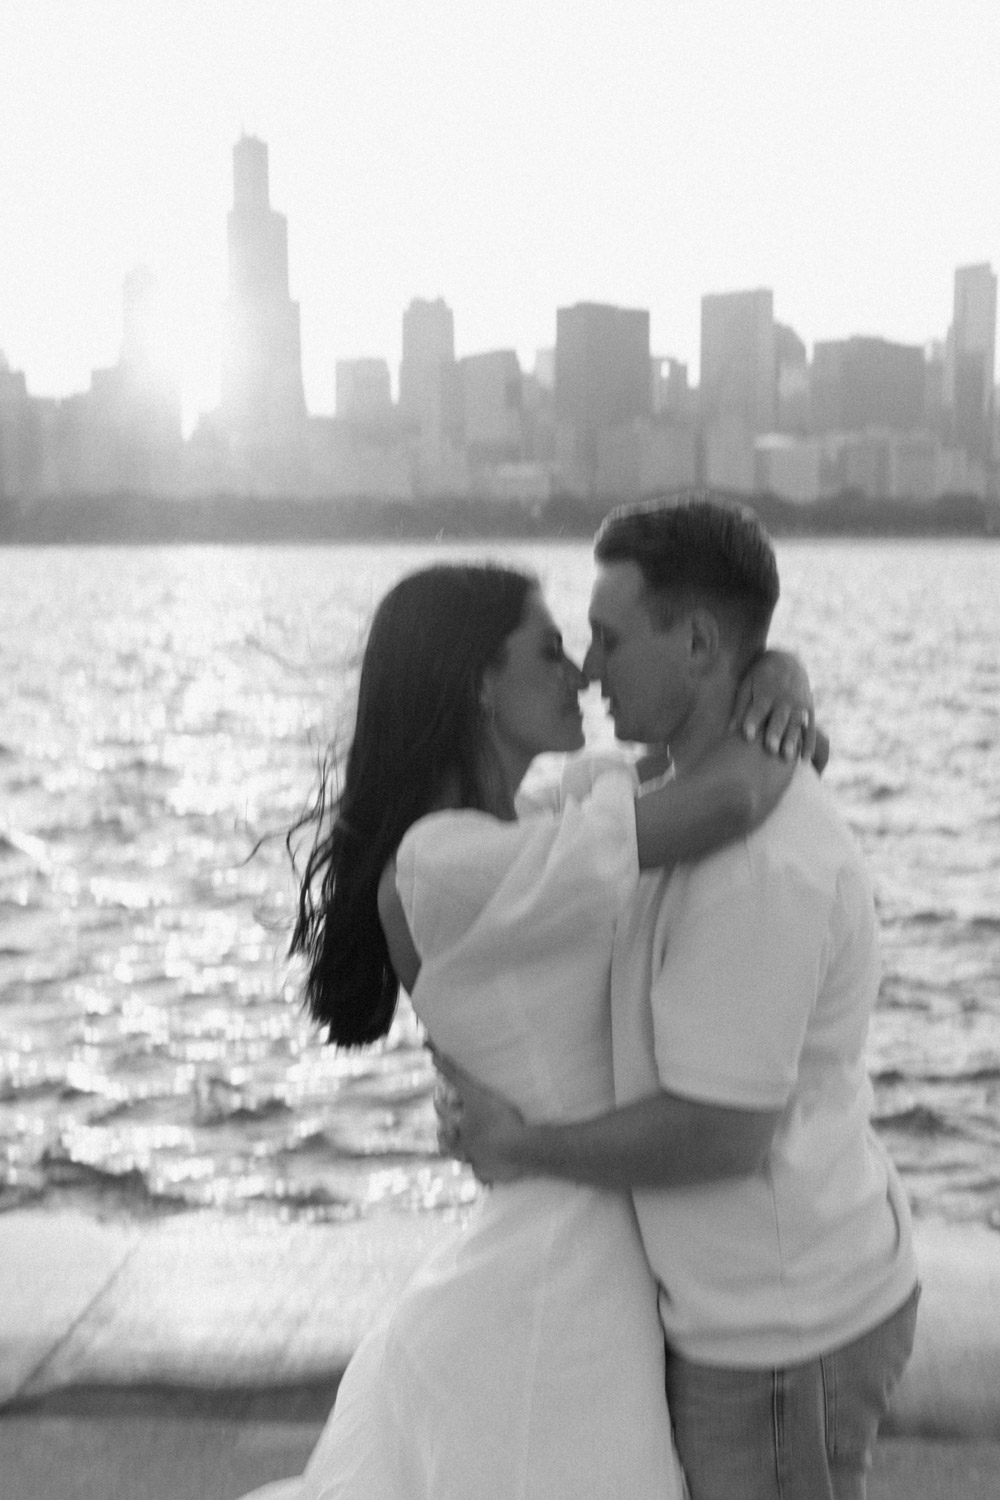 A classic black and white engagement photo with a slight camera blur